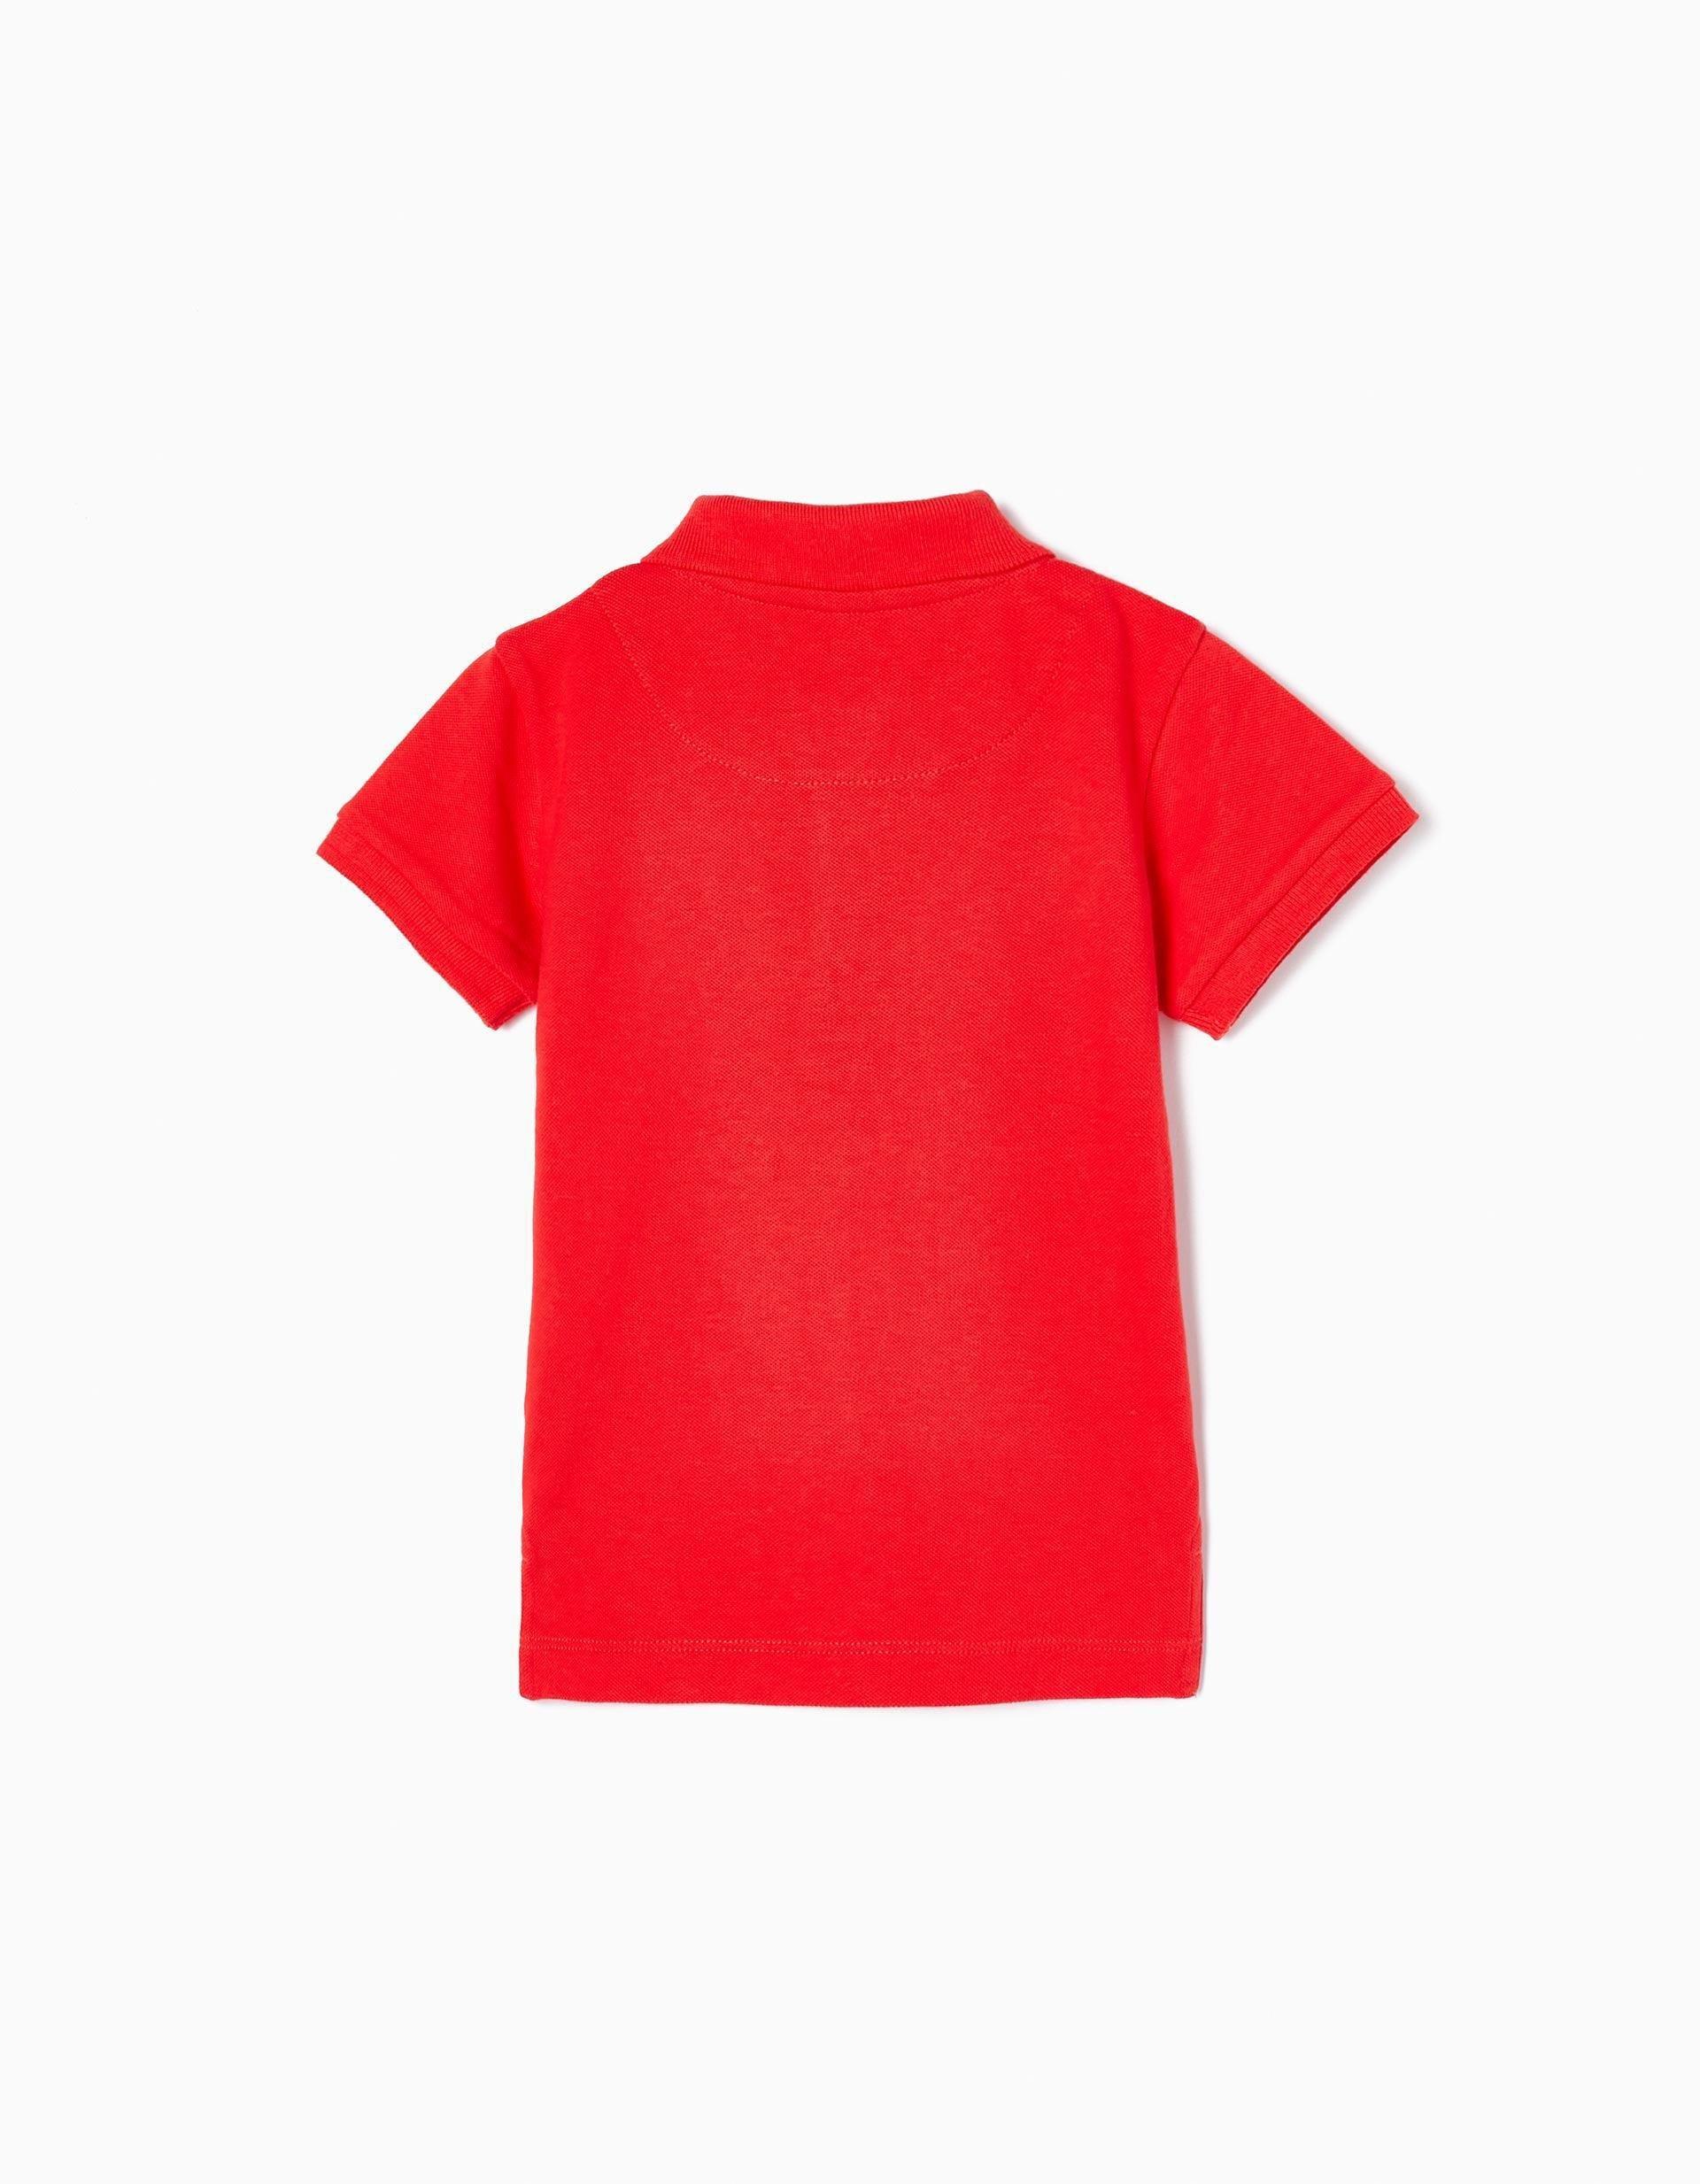 Gant - Red Polo Neck Detailed T-Shirt, Baby Boys